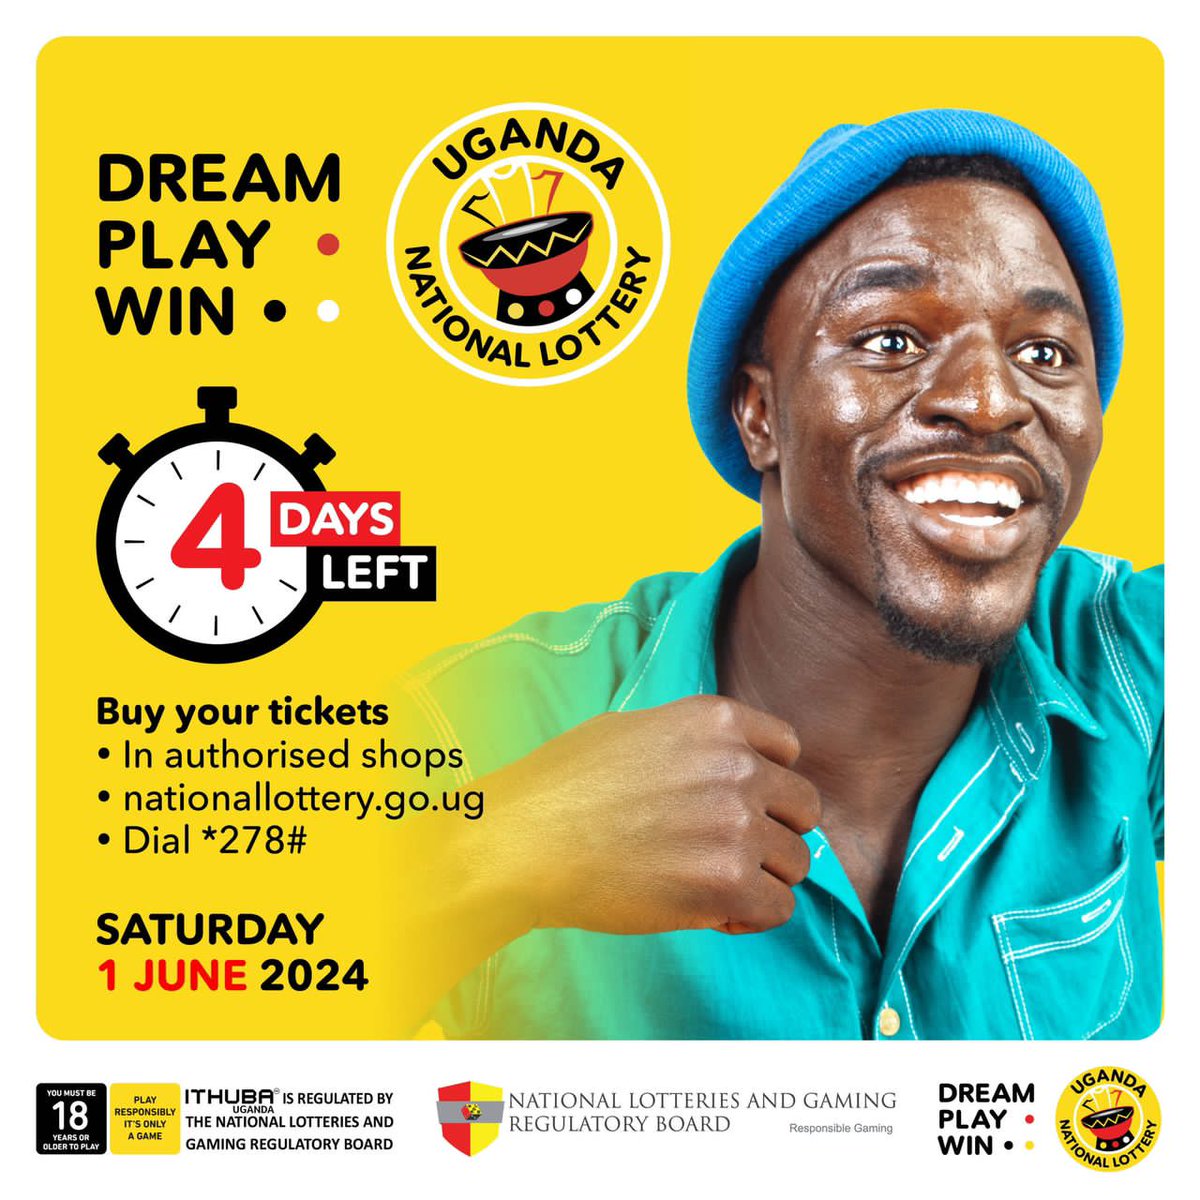 Time is running out! Only 4 days left to win big with the Uganda National Lottery! Don't miss your chance! Grab your tickets from authorized shops, online at nationallottery.go.ug or simply dial *278#. Good luck! #UgandaNationalLottery